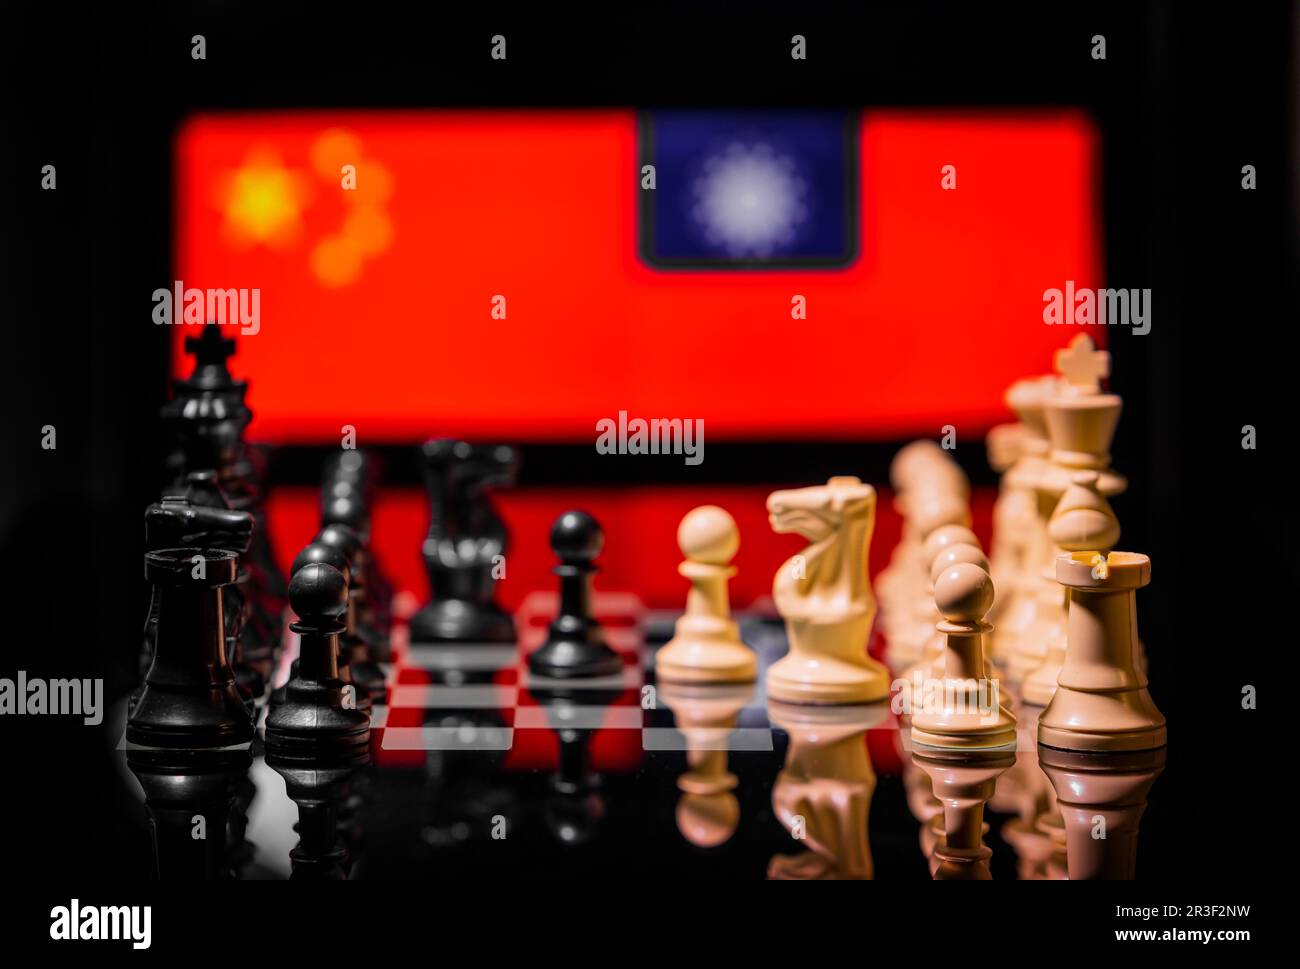 Conceptual Image Of War Between China And Taiwan Using Chess Pieces And